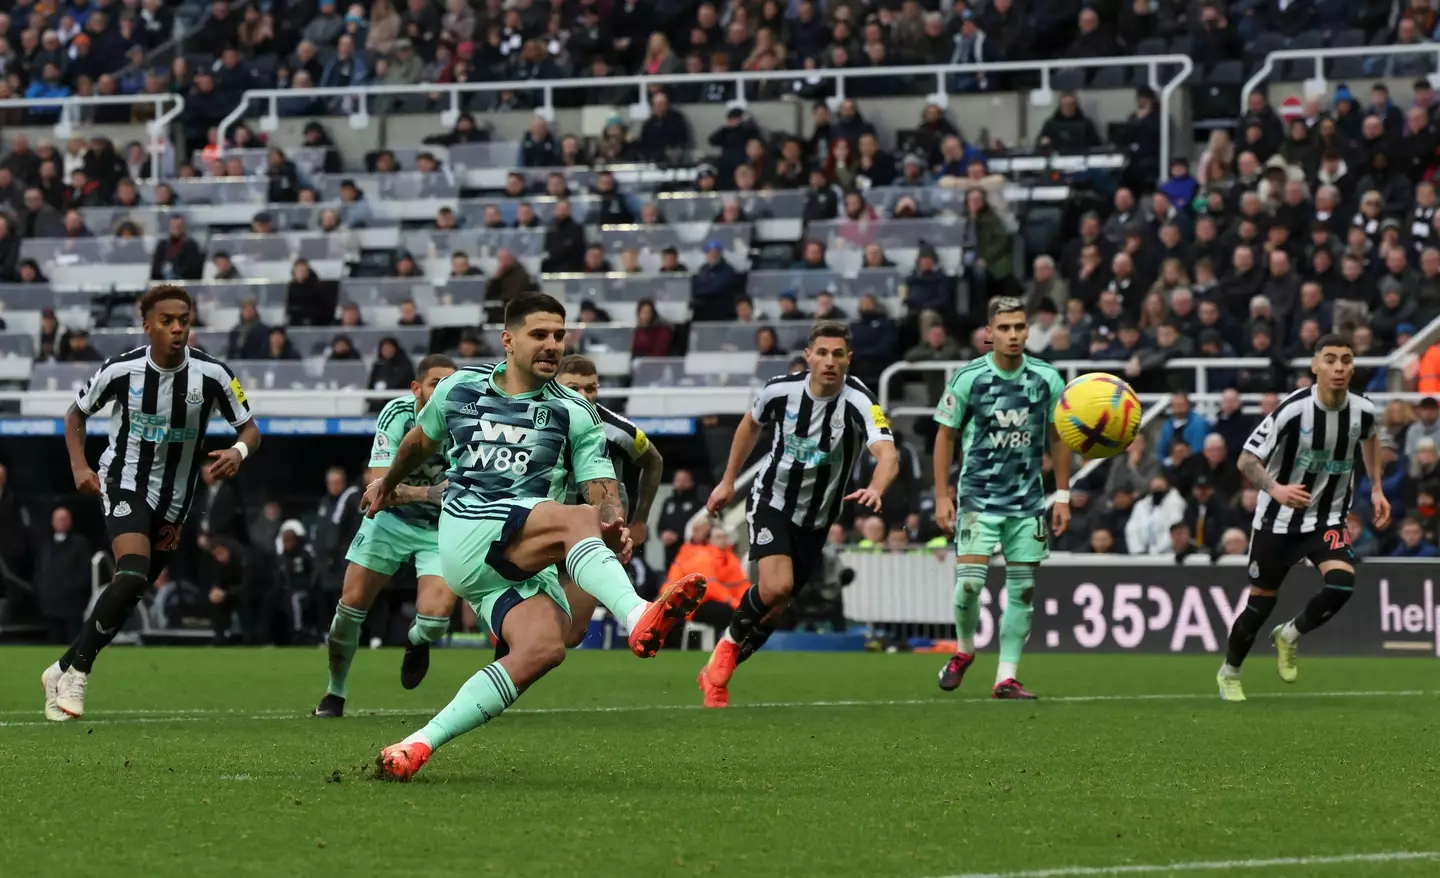 Mitrovic's slip means his penalty didn't count. (Image